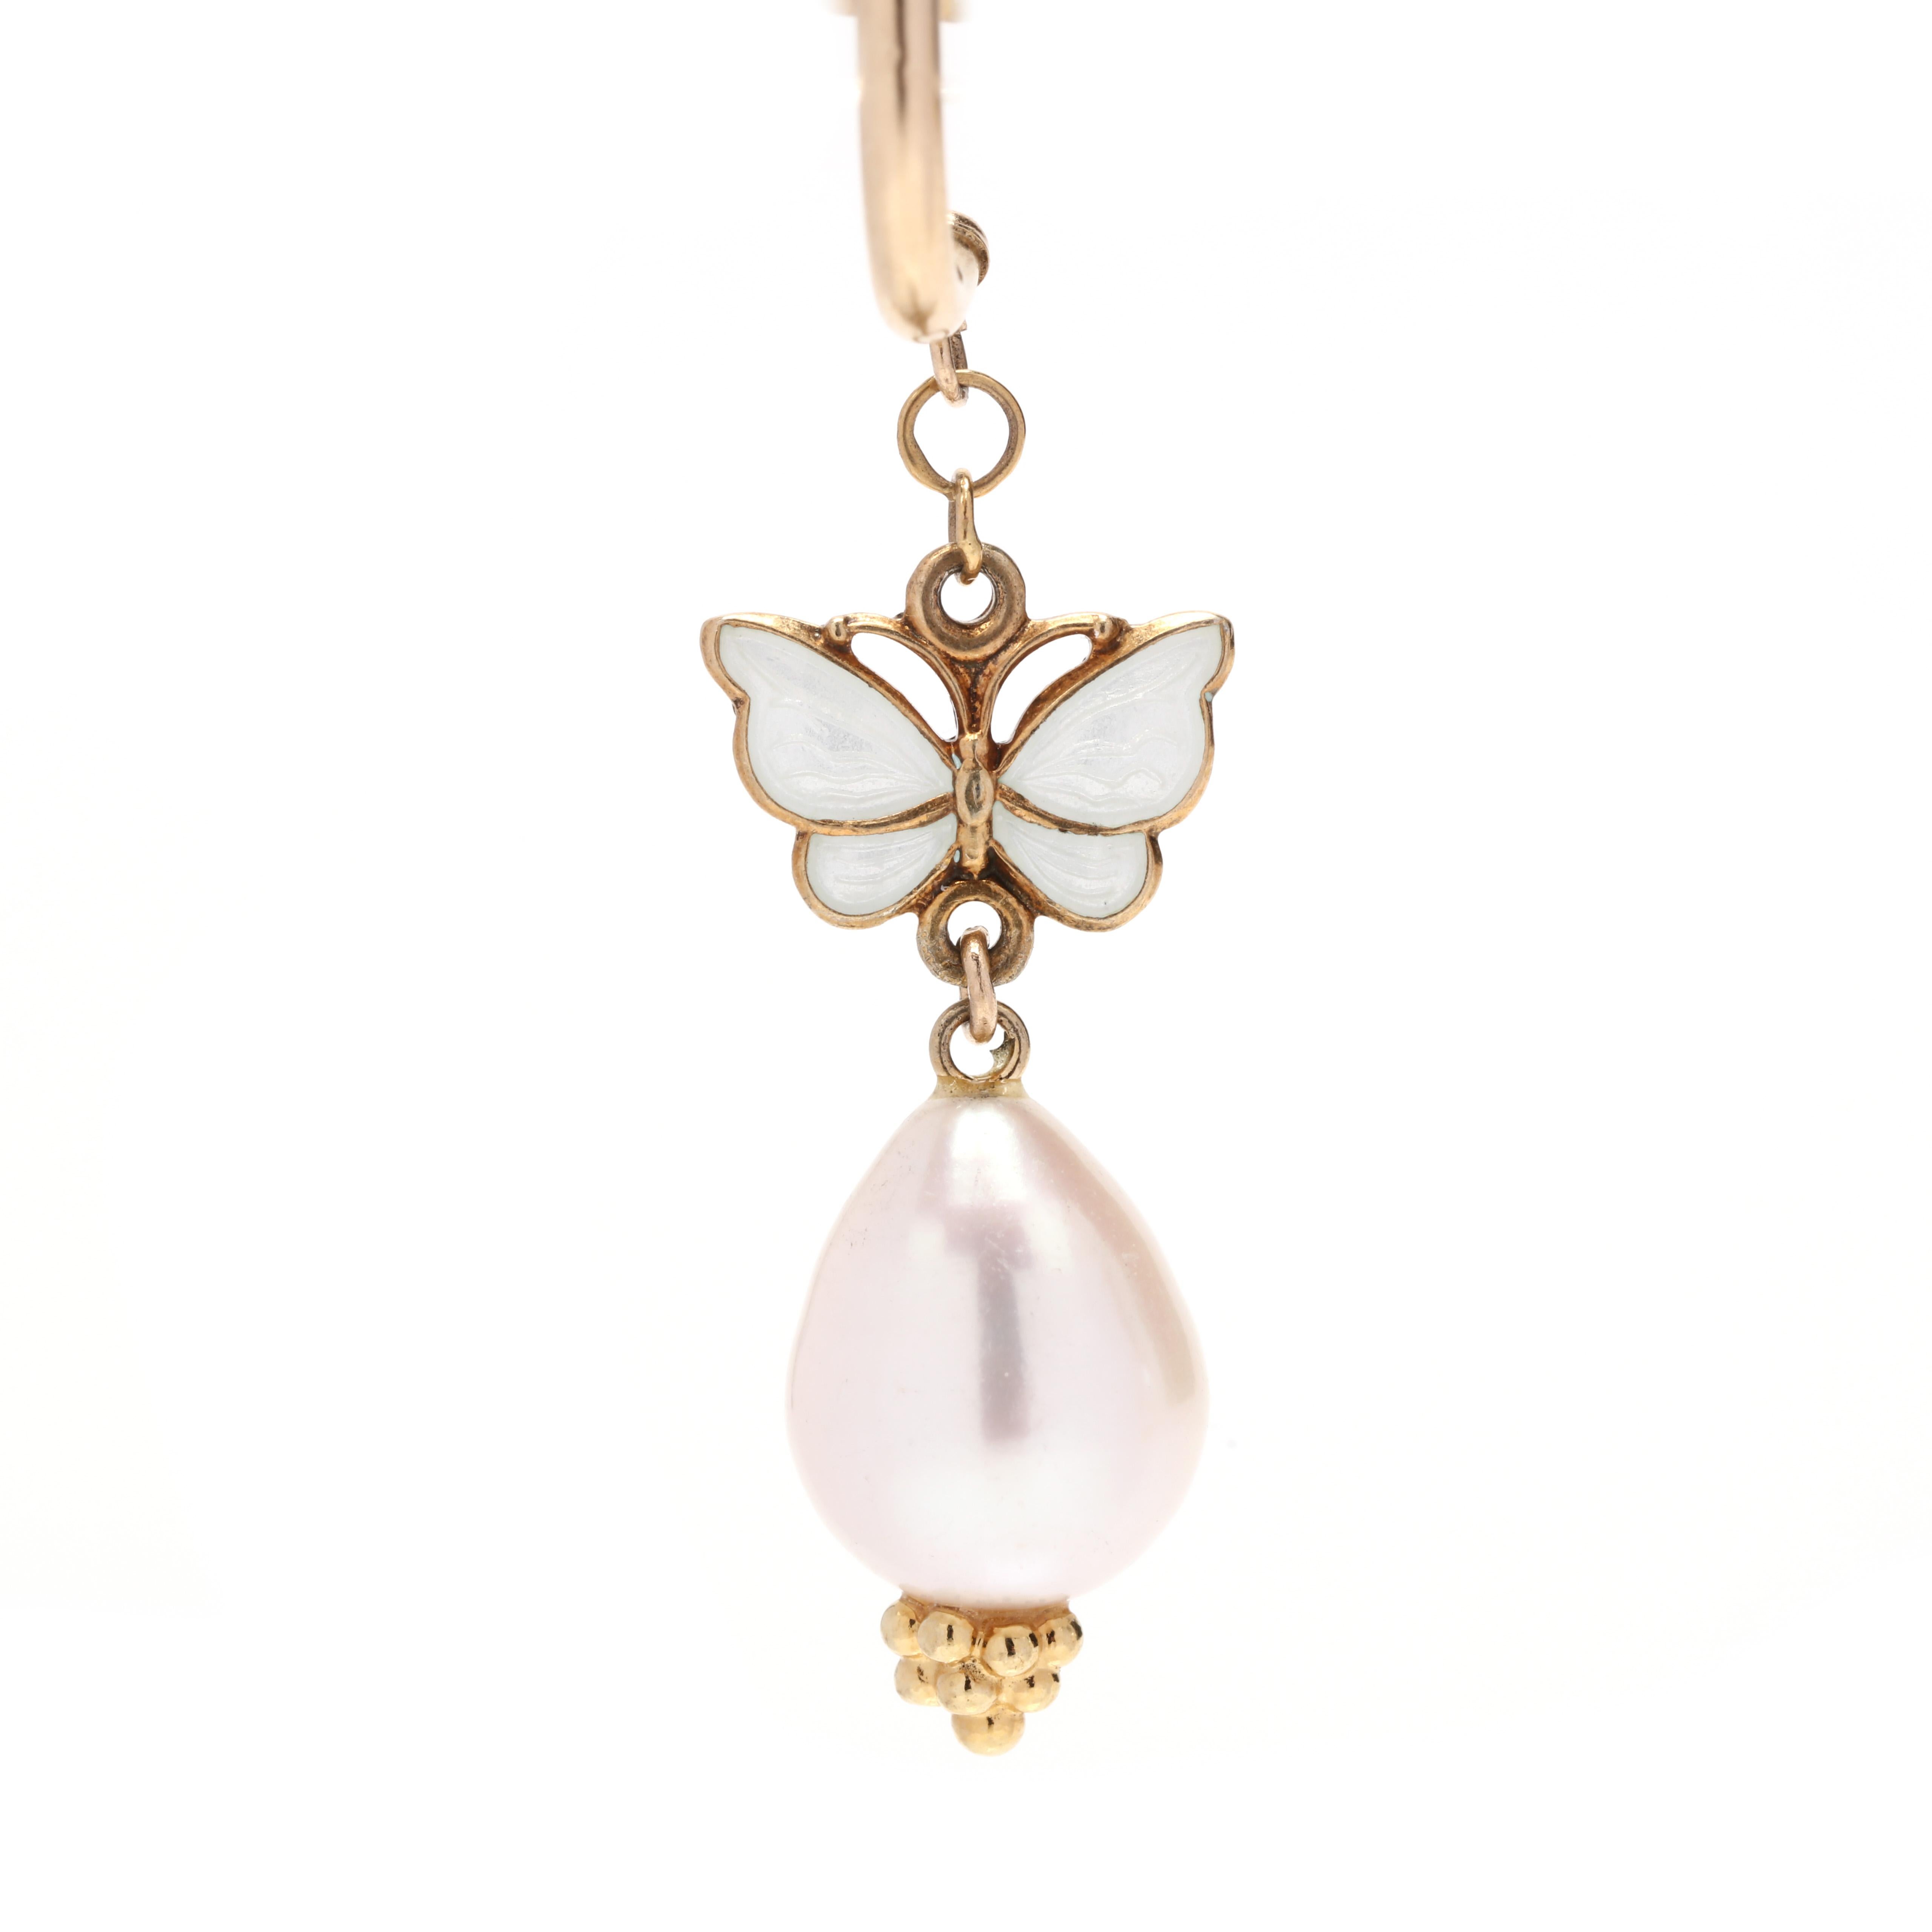 A pair of 14 karat yellow gold enamel butterfly and pearl dangle earrings. These earrings feature a stud, pierced half hoop design suspended a butterfly motif with white enamel detailing and an oblong pearl with beaded detailing